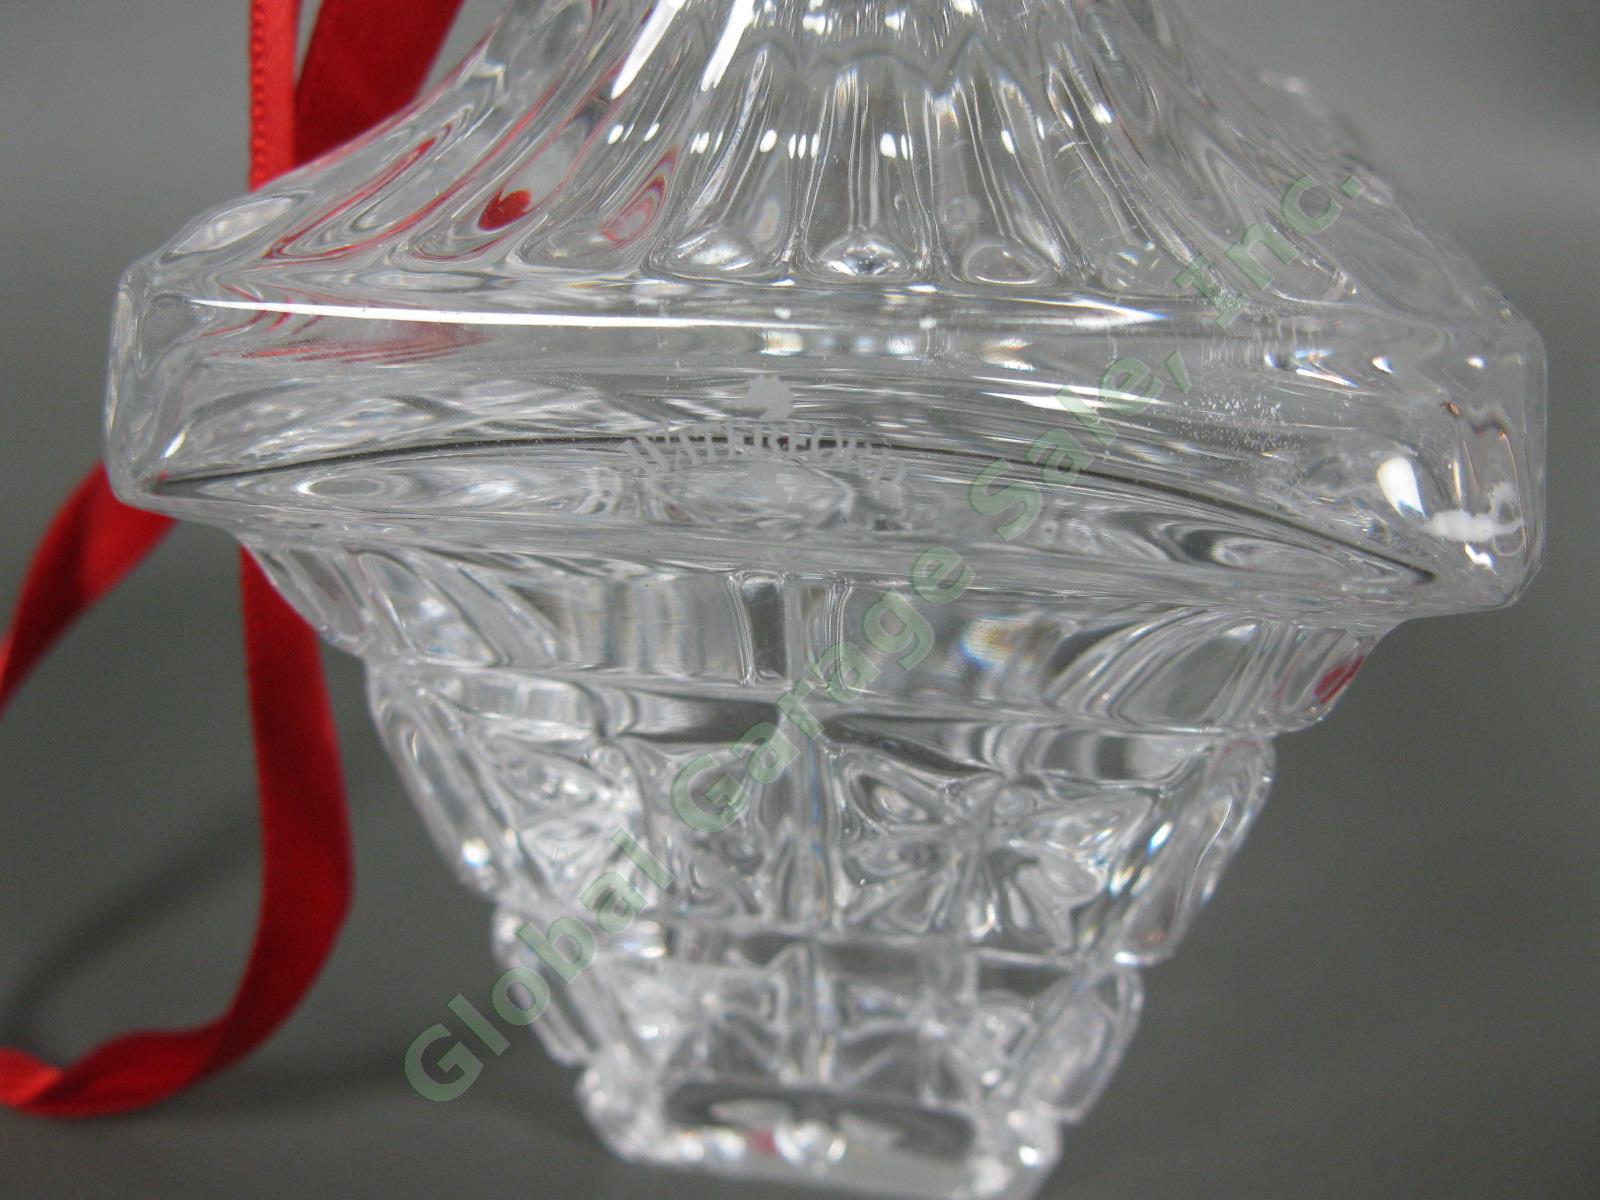 1998 Waterford Crystal Annual Christmas Ball Ornament 7th Edition MINT in Box 3